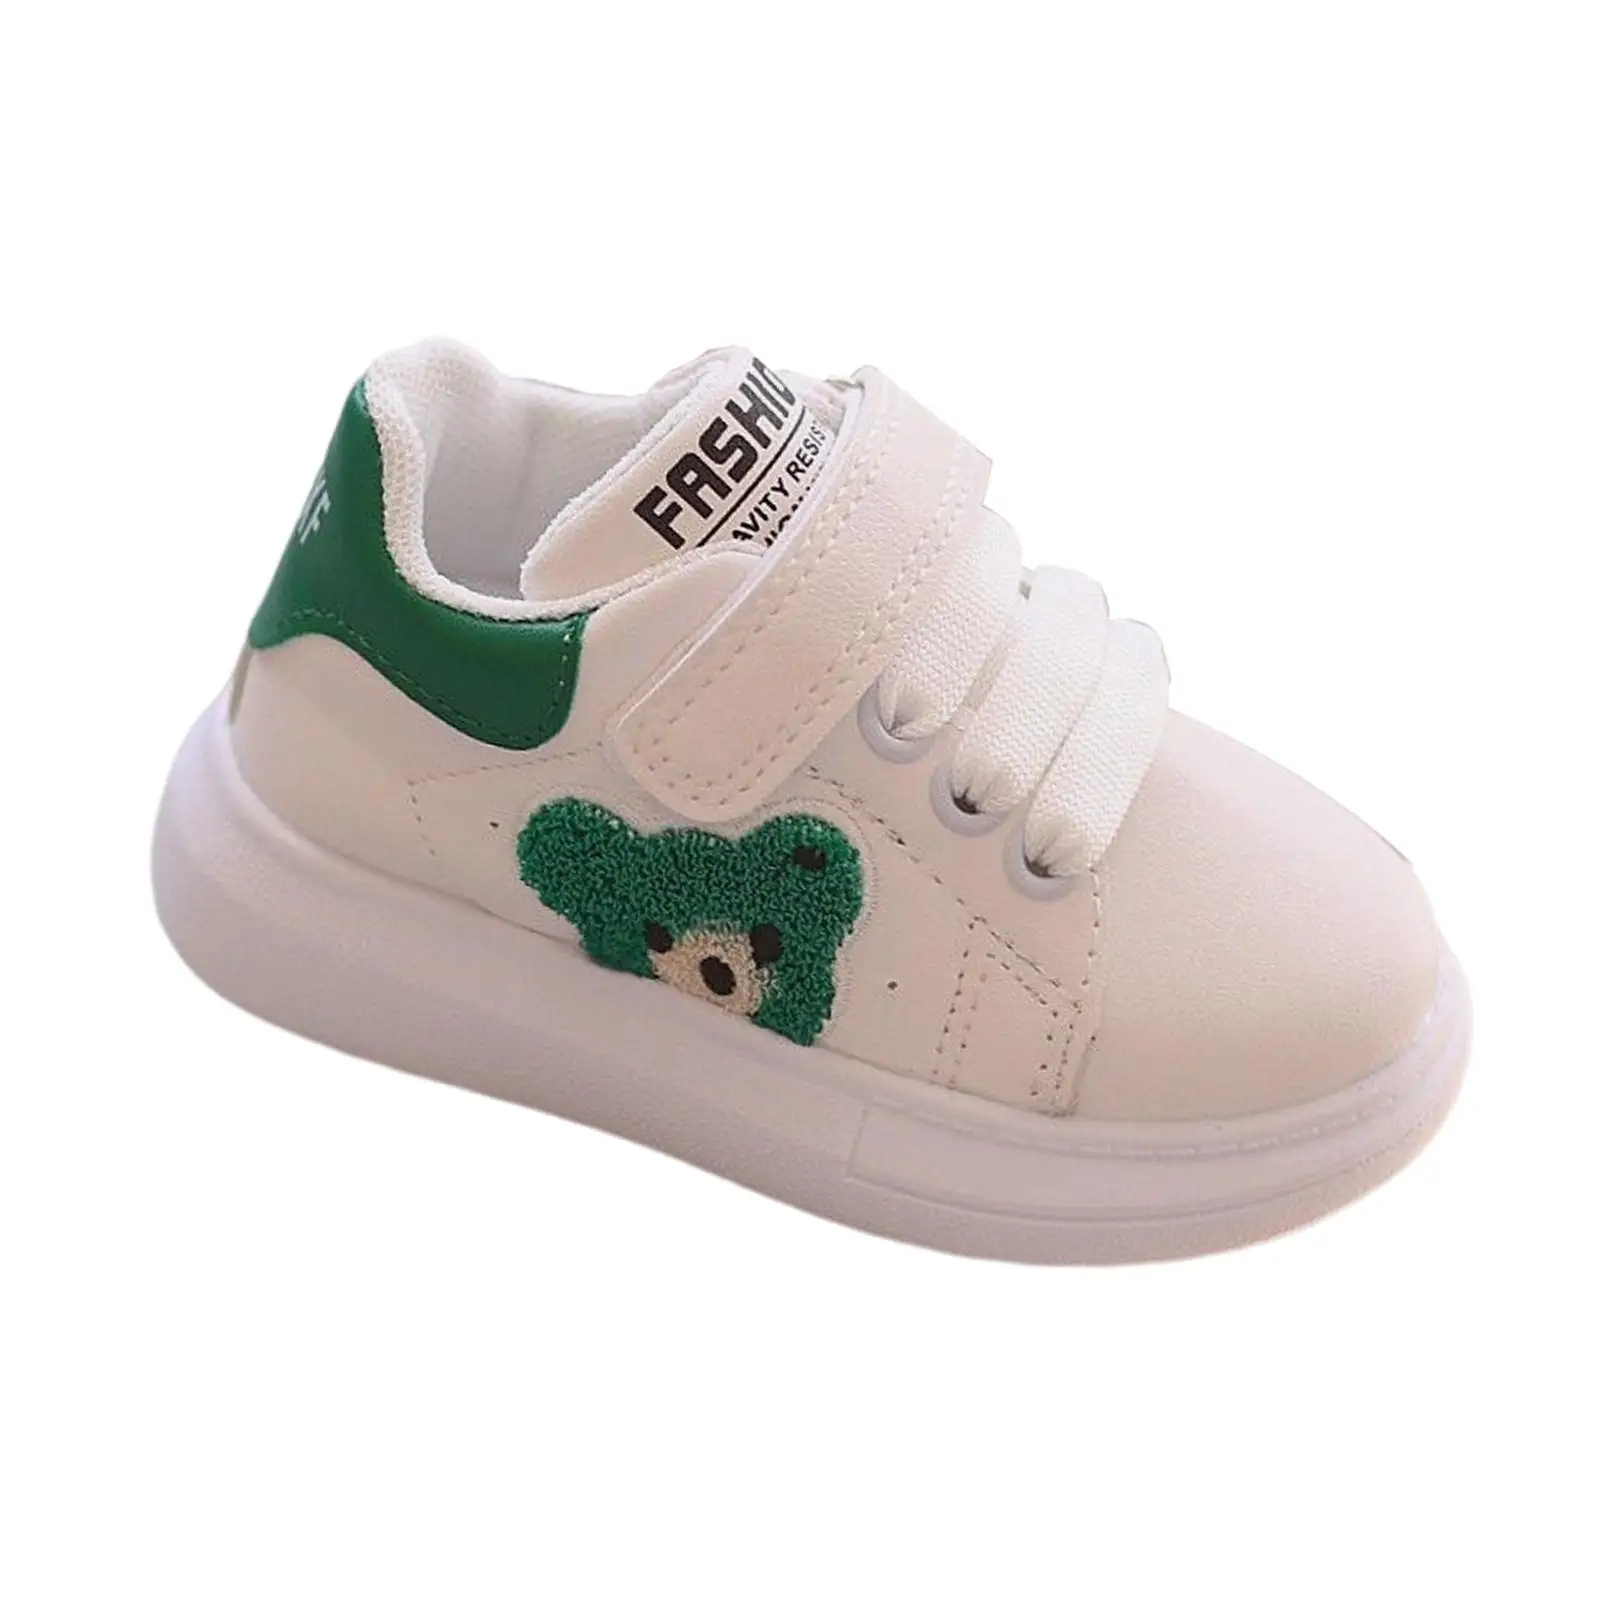 Nonslip Infant Sneakers Flat Shoes Casual with Bear Embroidery Crib Trainers Soft PU Leather Walking Shoes for Kids Unisex Child